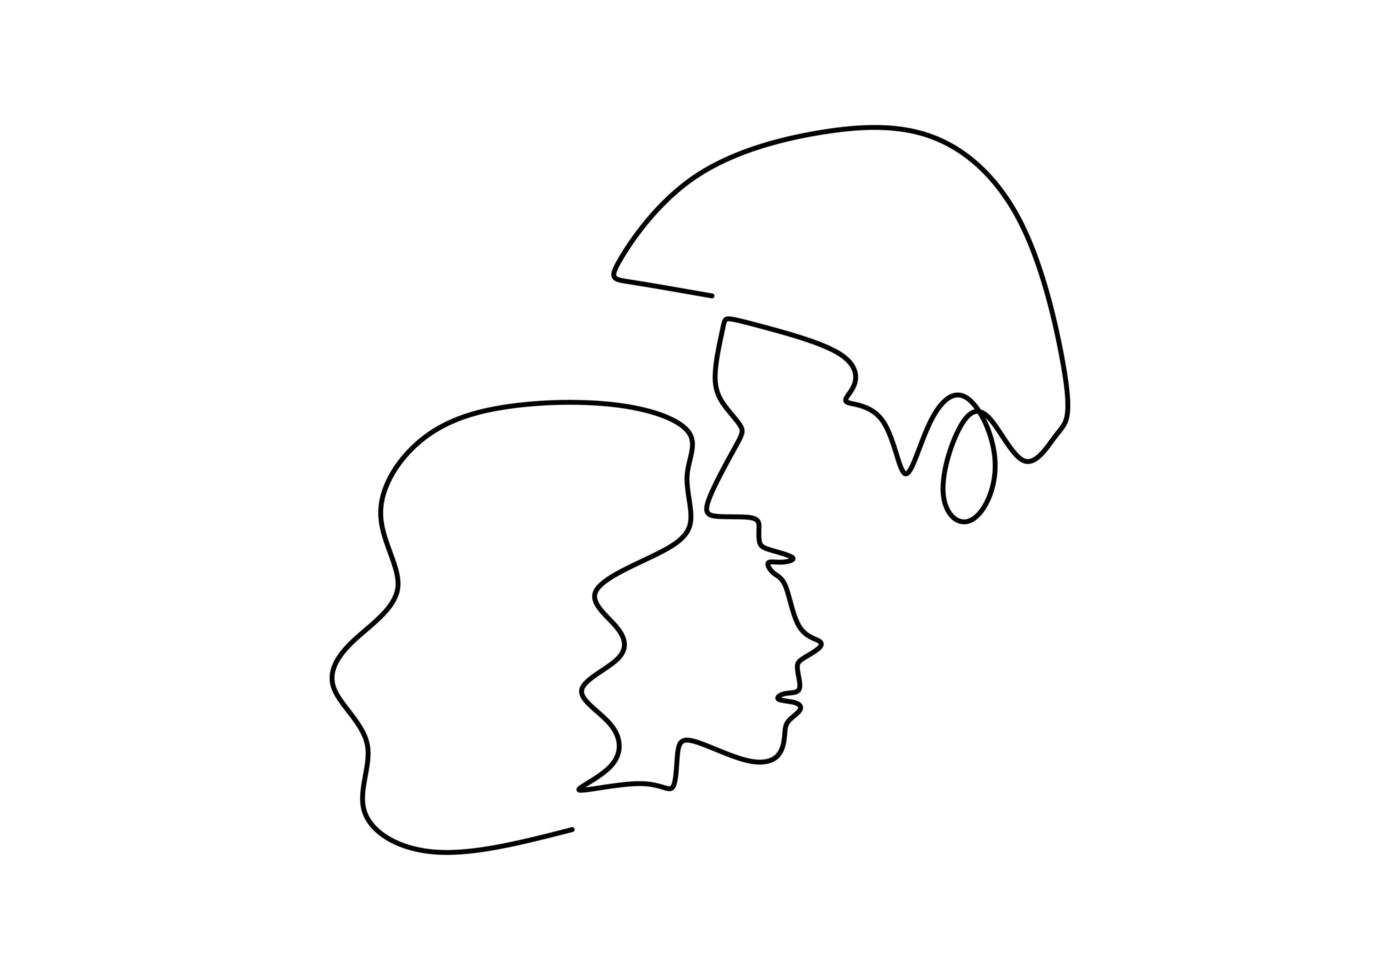 Continuous one line drawing. Loving couple woman and man in love relationship. Vector illustration, minimalism style.